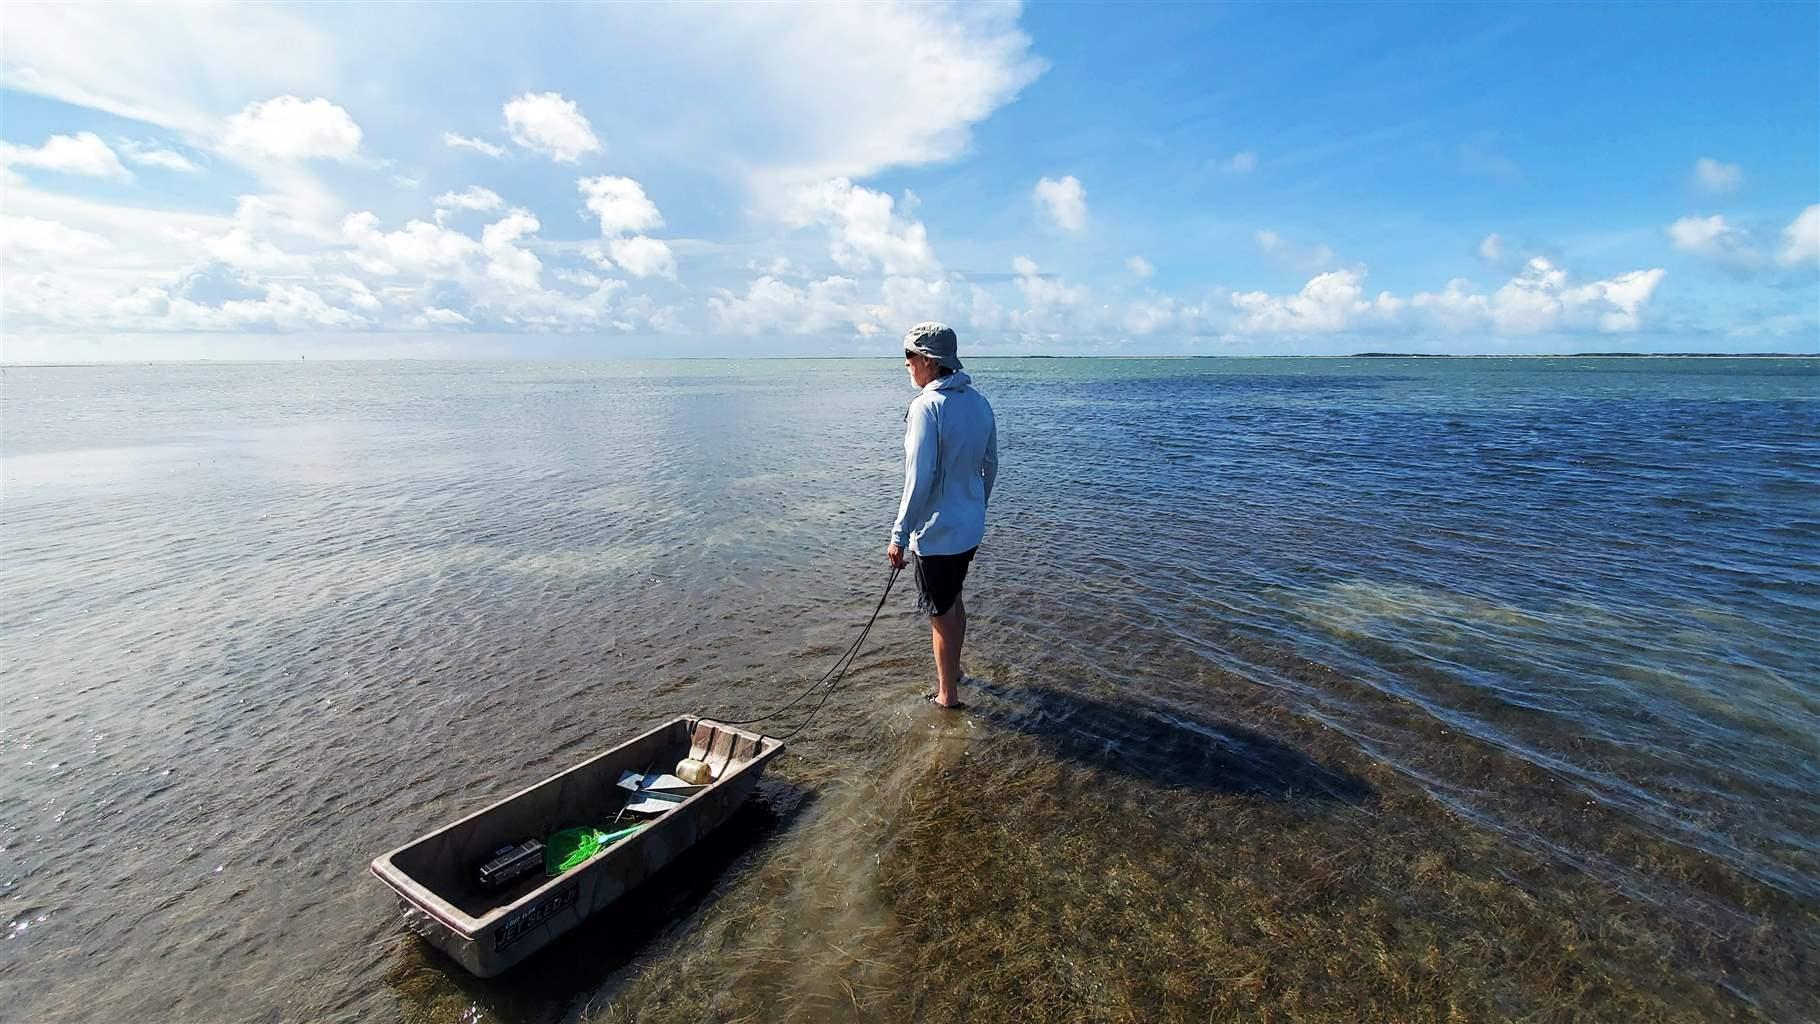 A man stands in ankle-deep waters under a blue sky and prominent clouds holding a tow line tethered to a small, flat-bottomed boat. Seagrasses are visible beneath the surface of the water. 